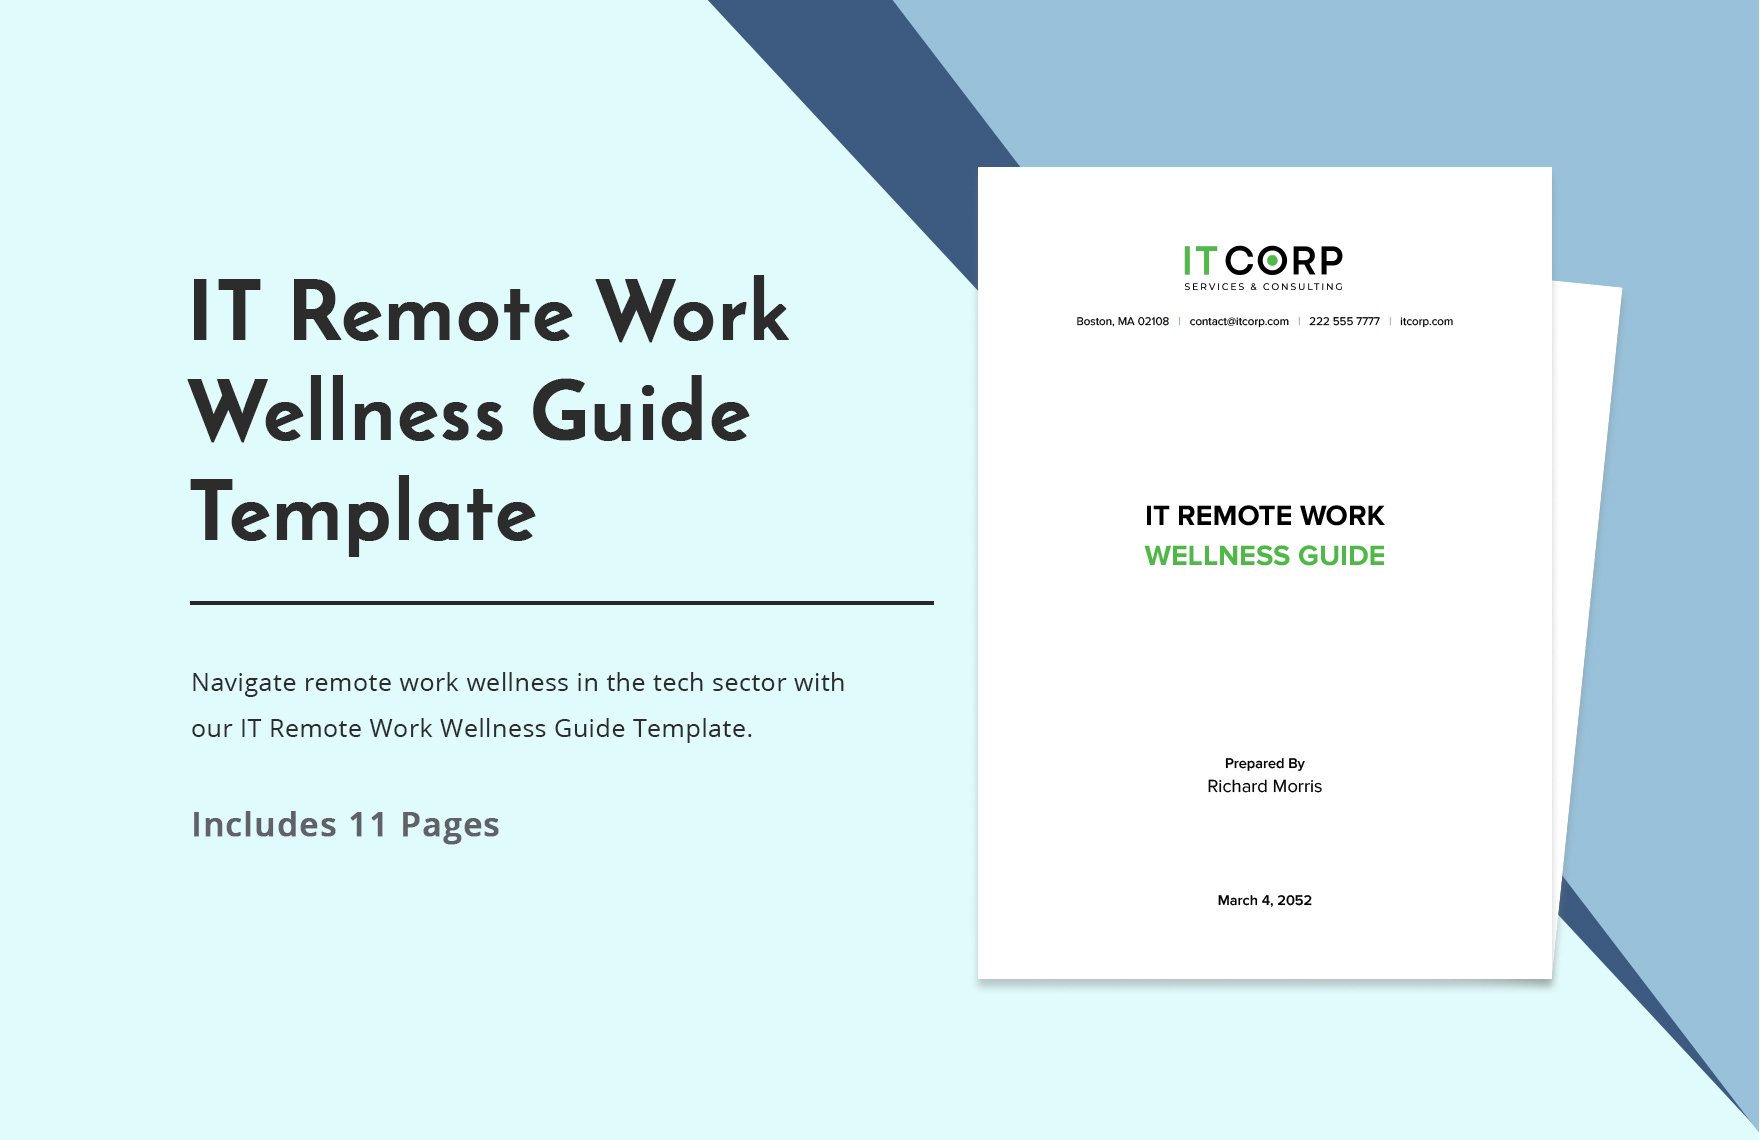 IT Remote Work Wellness Guide Template in Word, Google Docs, PDF